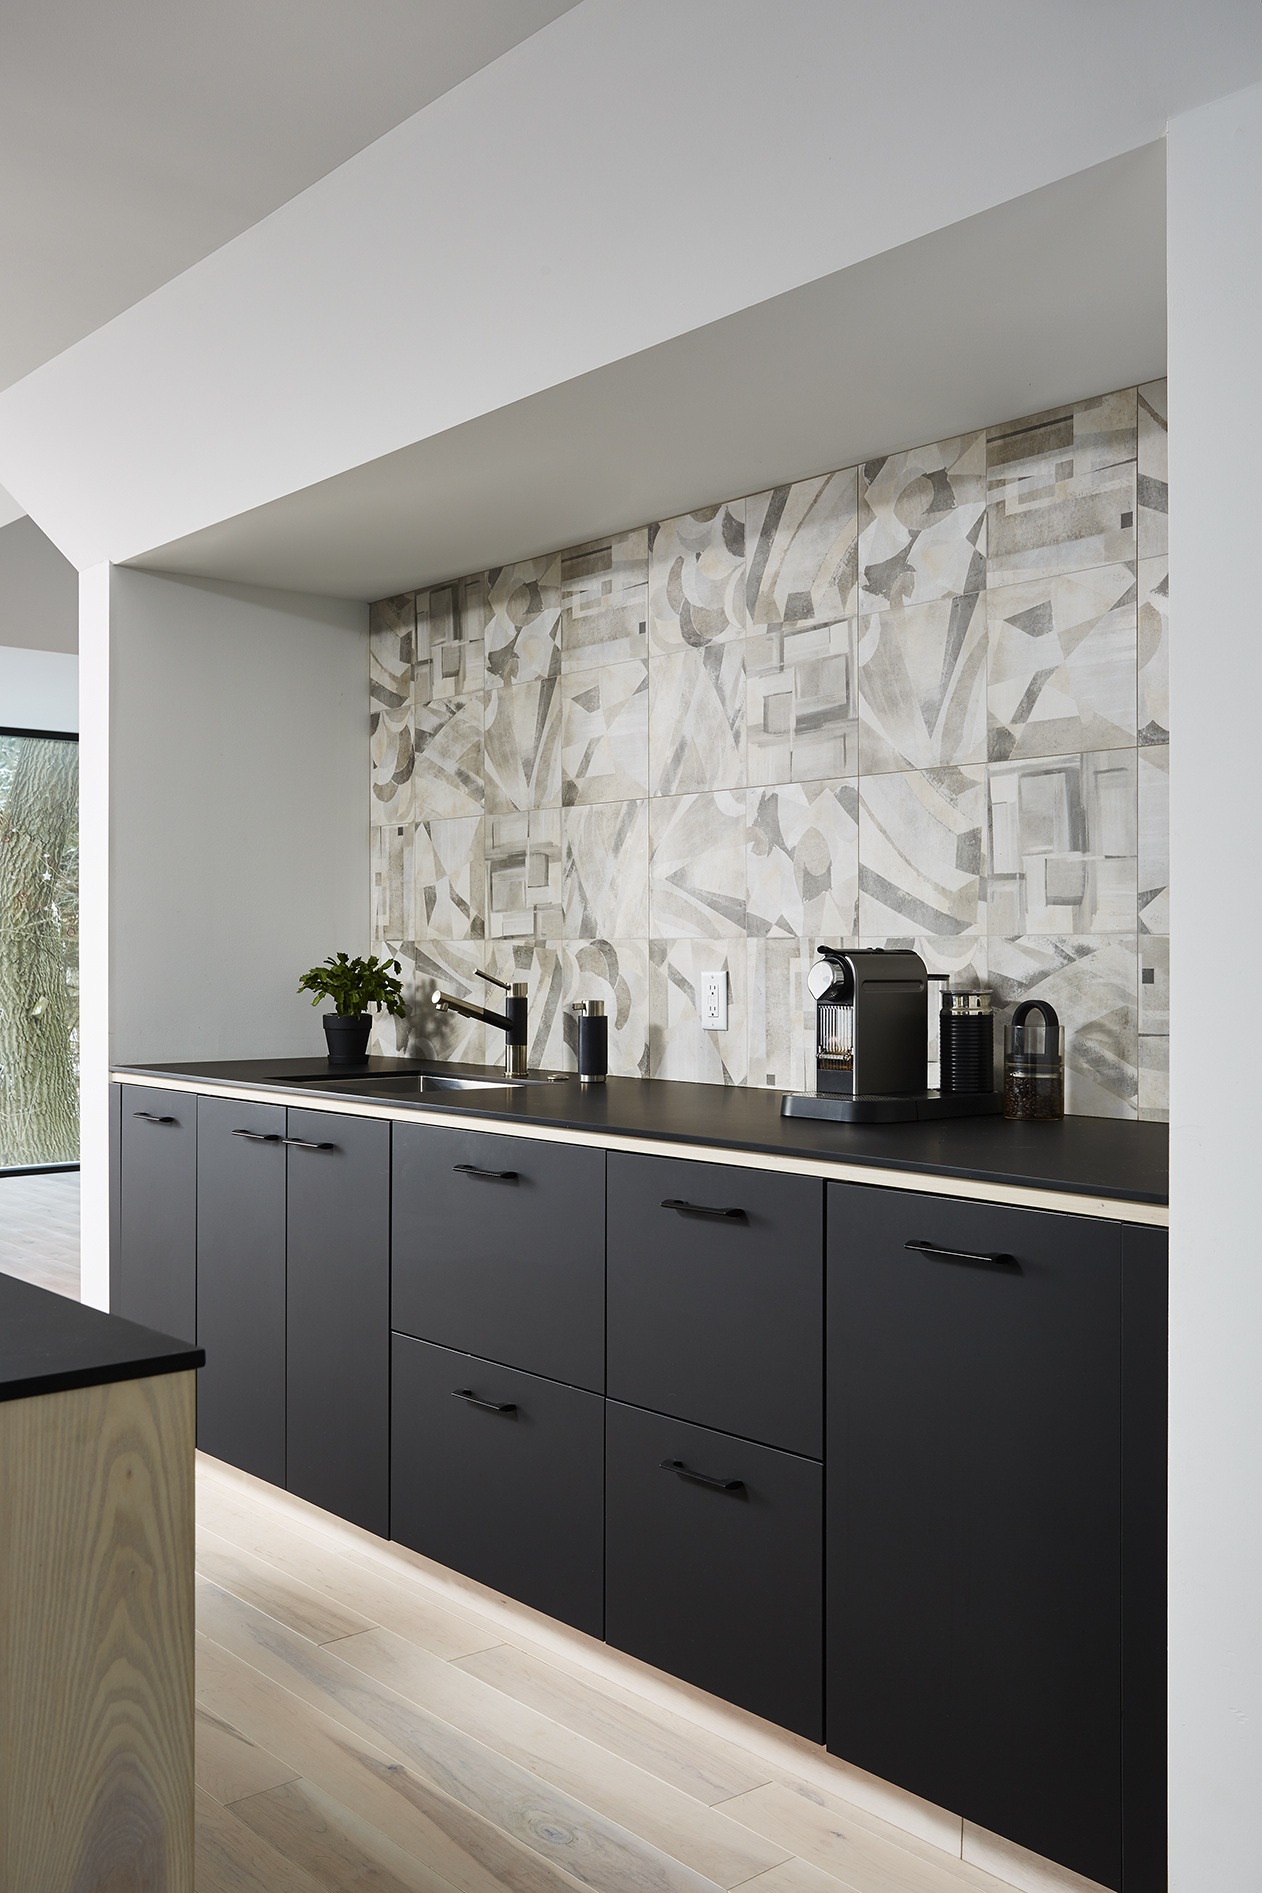 Recessed kitchen working area with graphic tile backsplash